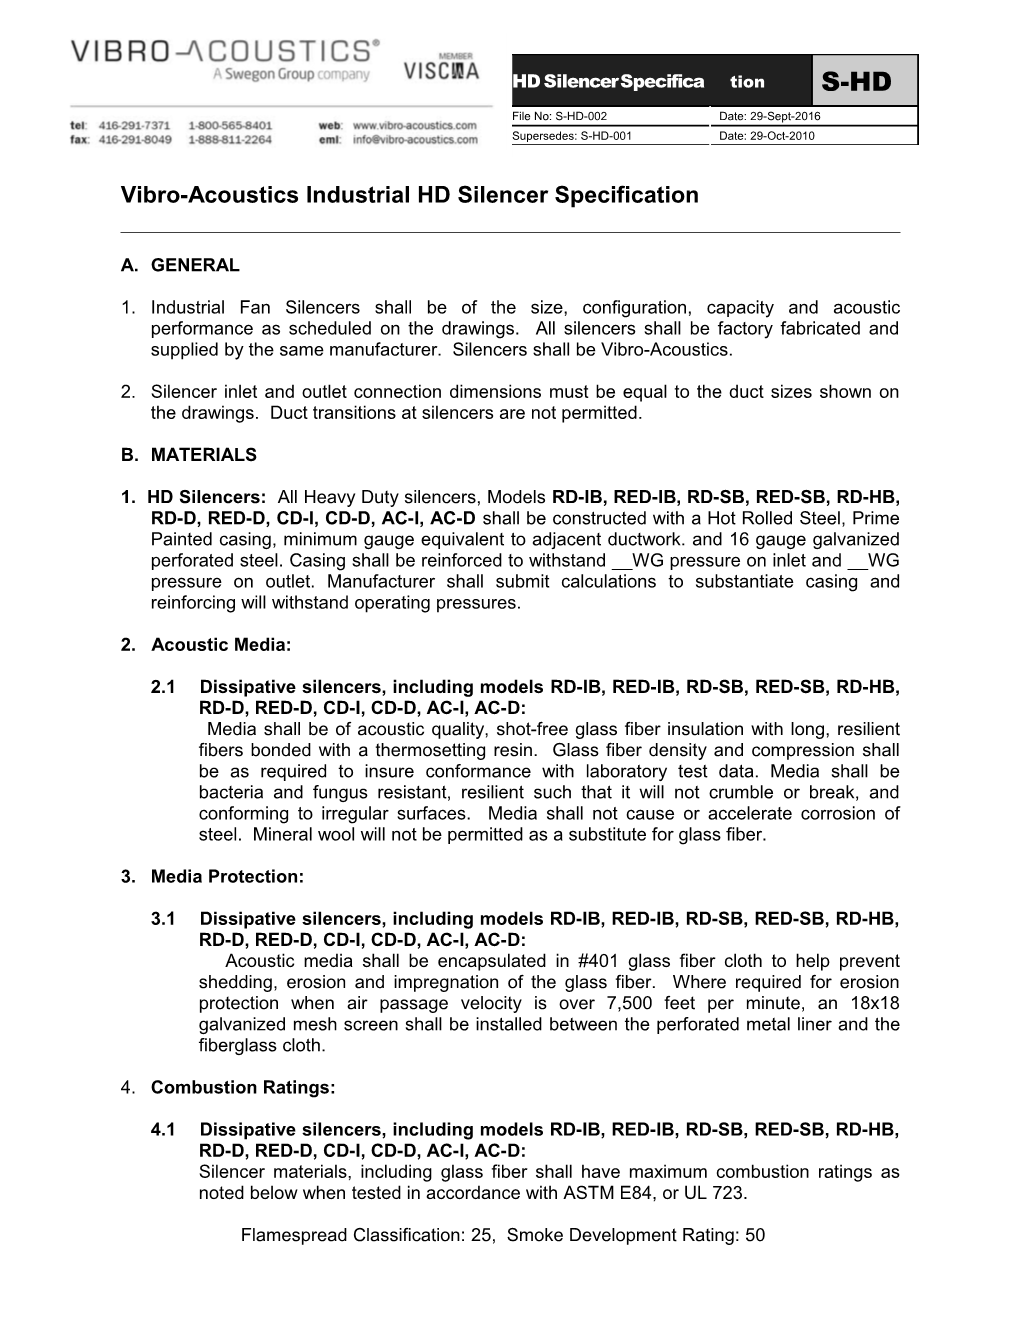 Vibro-Acoustics Industrial HD Silencer Specification